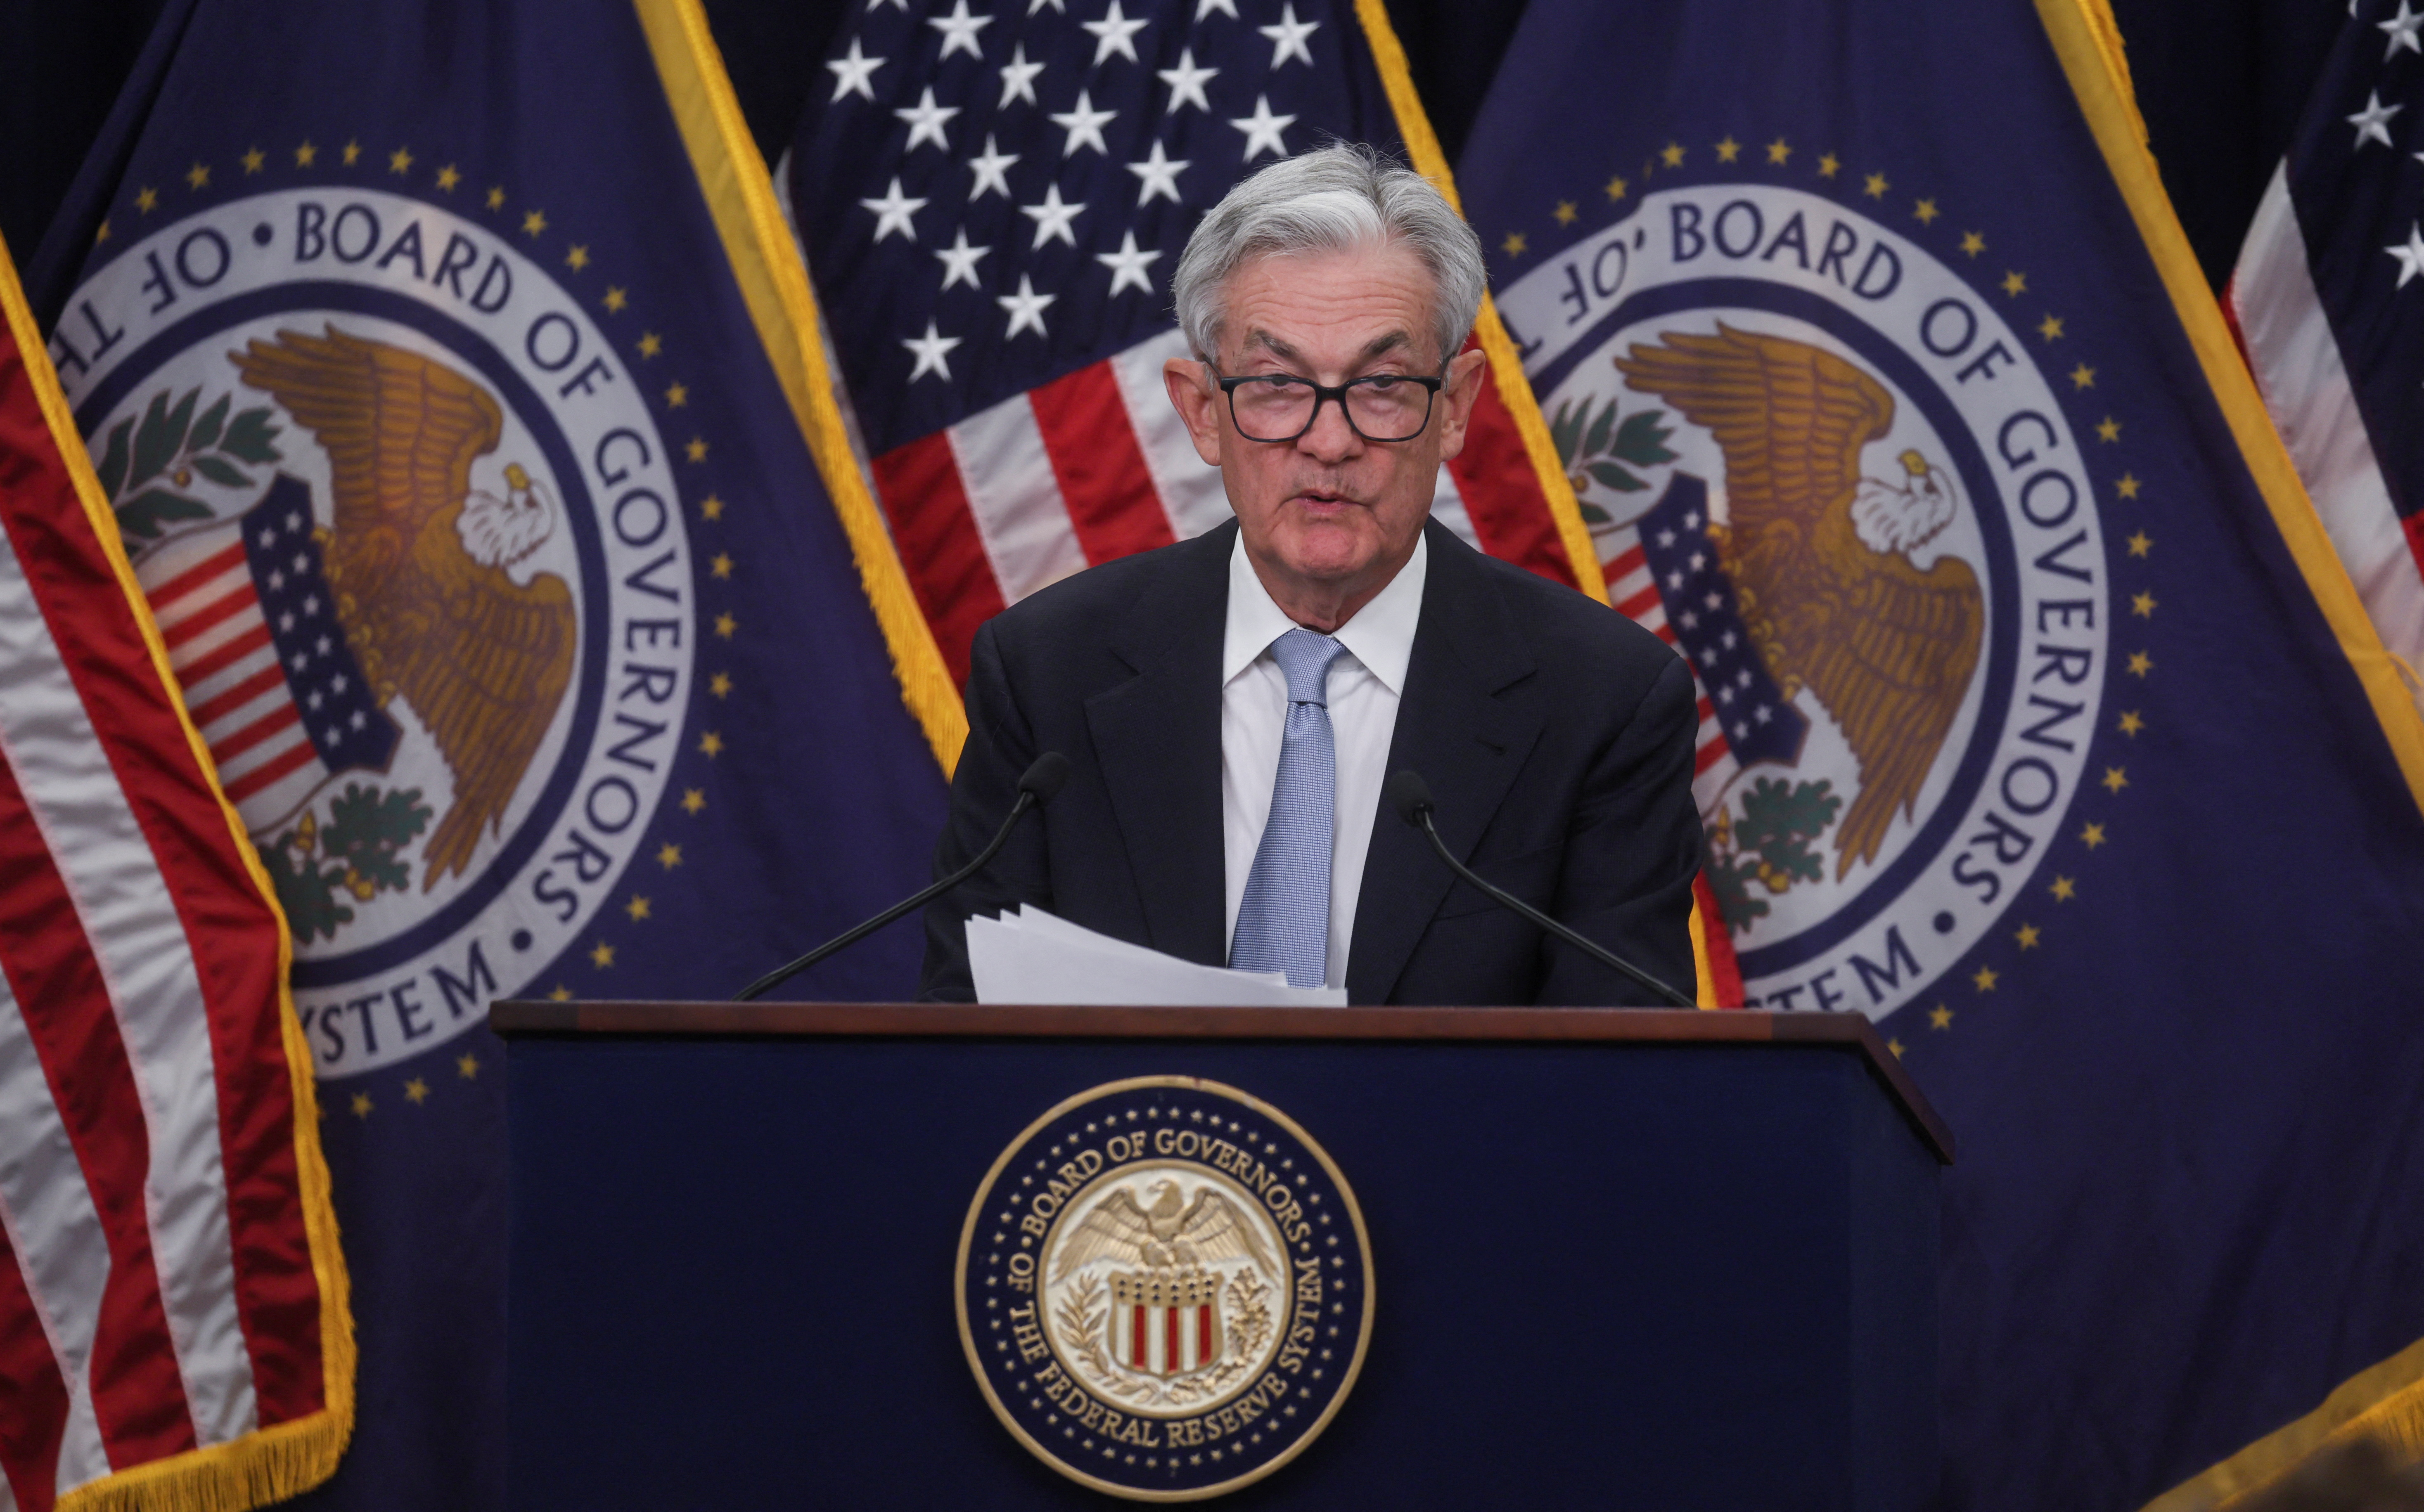 Fed Chair Powell holds news conference after the release of U.S. Fed interest rate policy decision in Washington